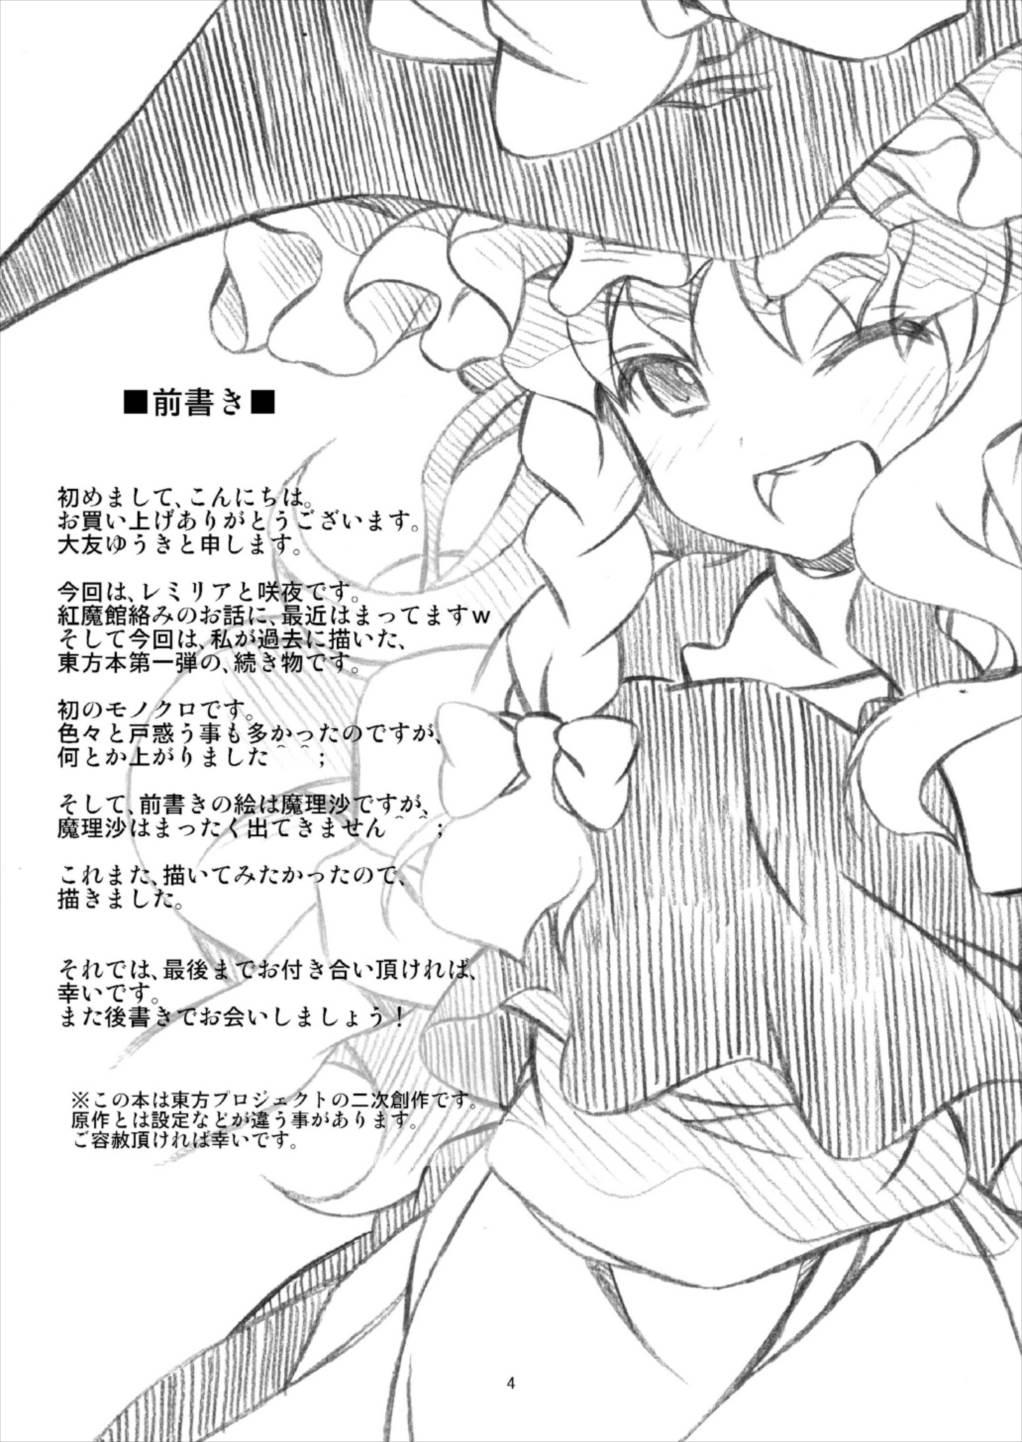 Sissy Touhou Megami Choukyouroku vol. 5 - Touhou project Finger - Picture 3